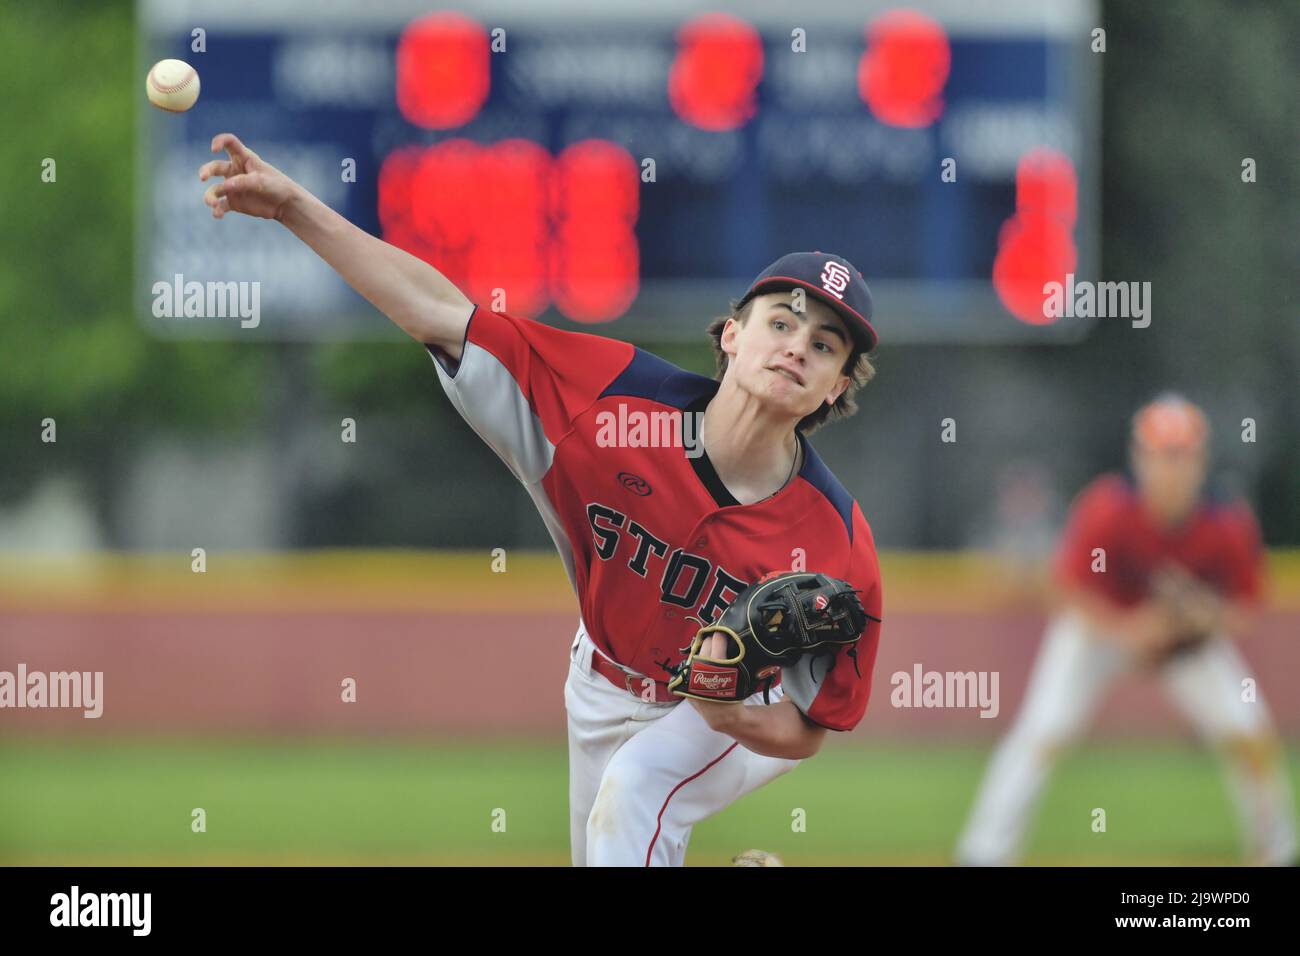 USA. Pitcher delivering a pitch to a waiting batter during a high school baseball game. Stock Photo